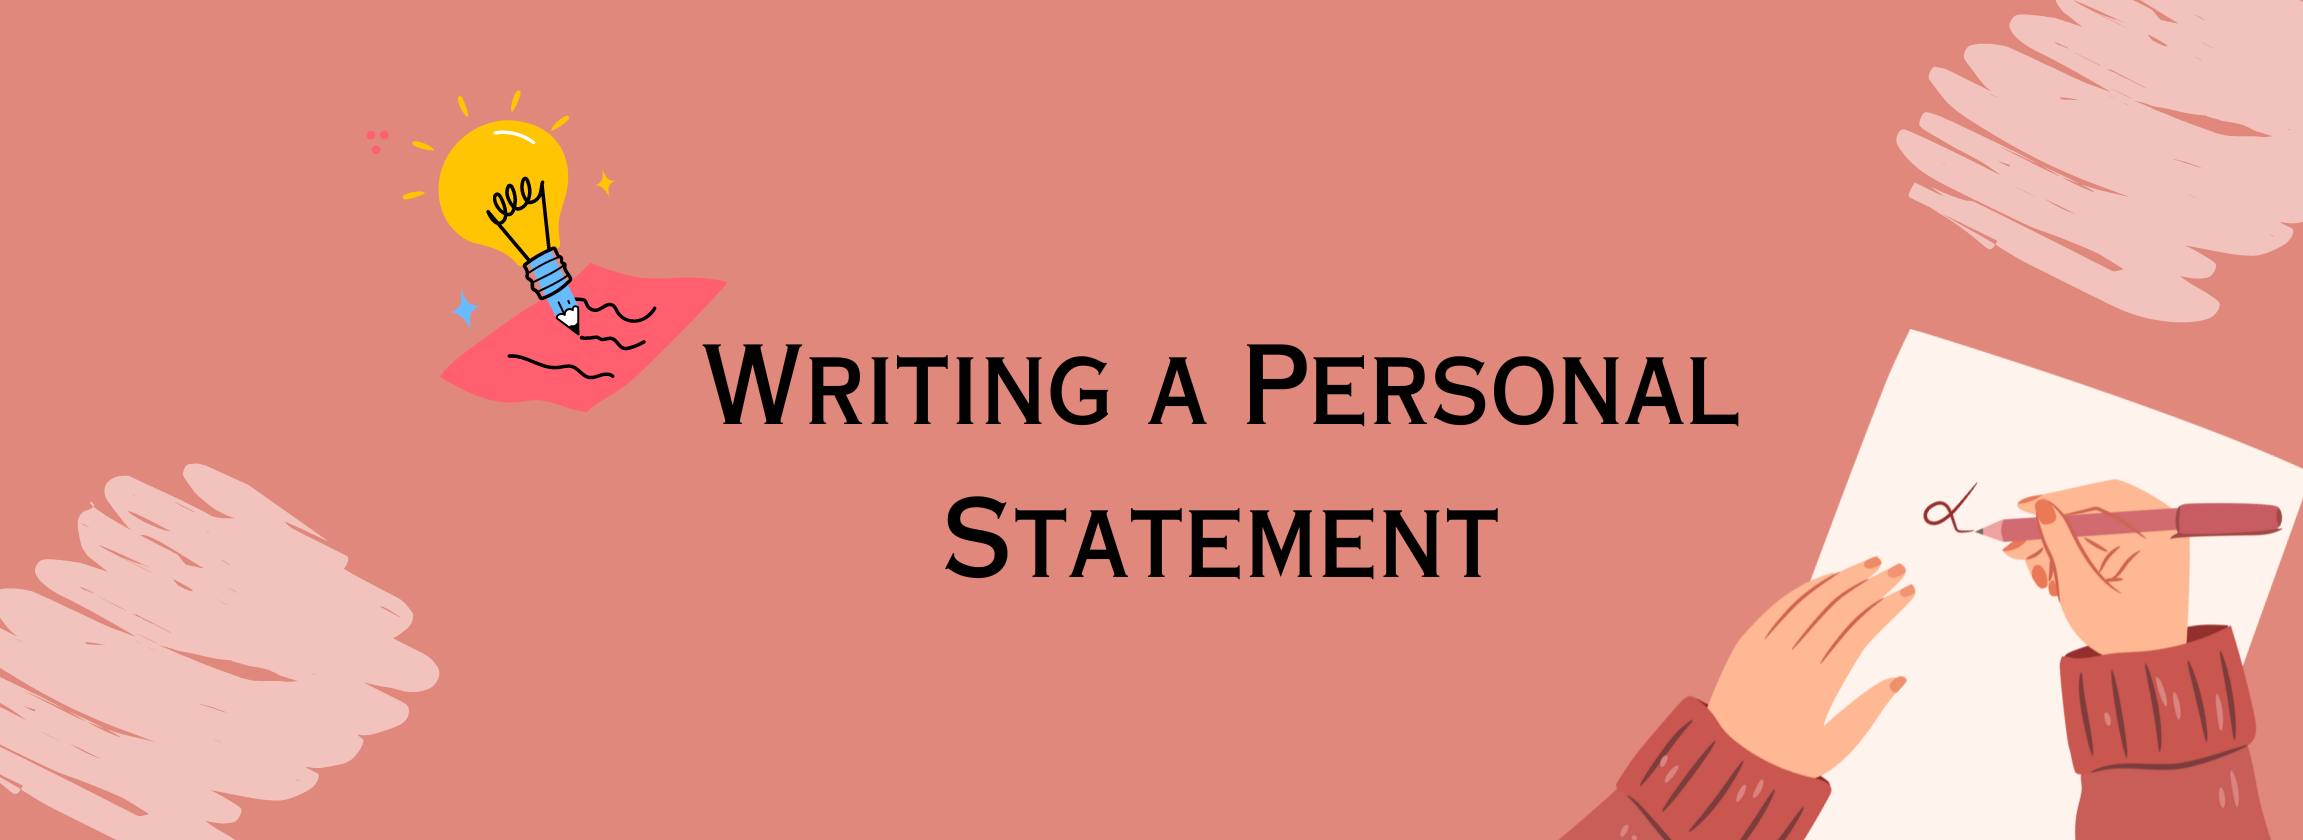 opening lines personal statement examples